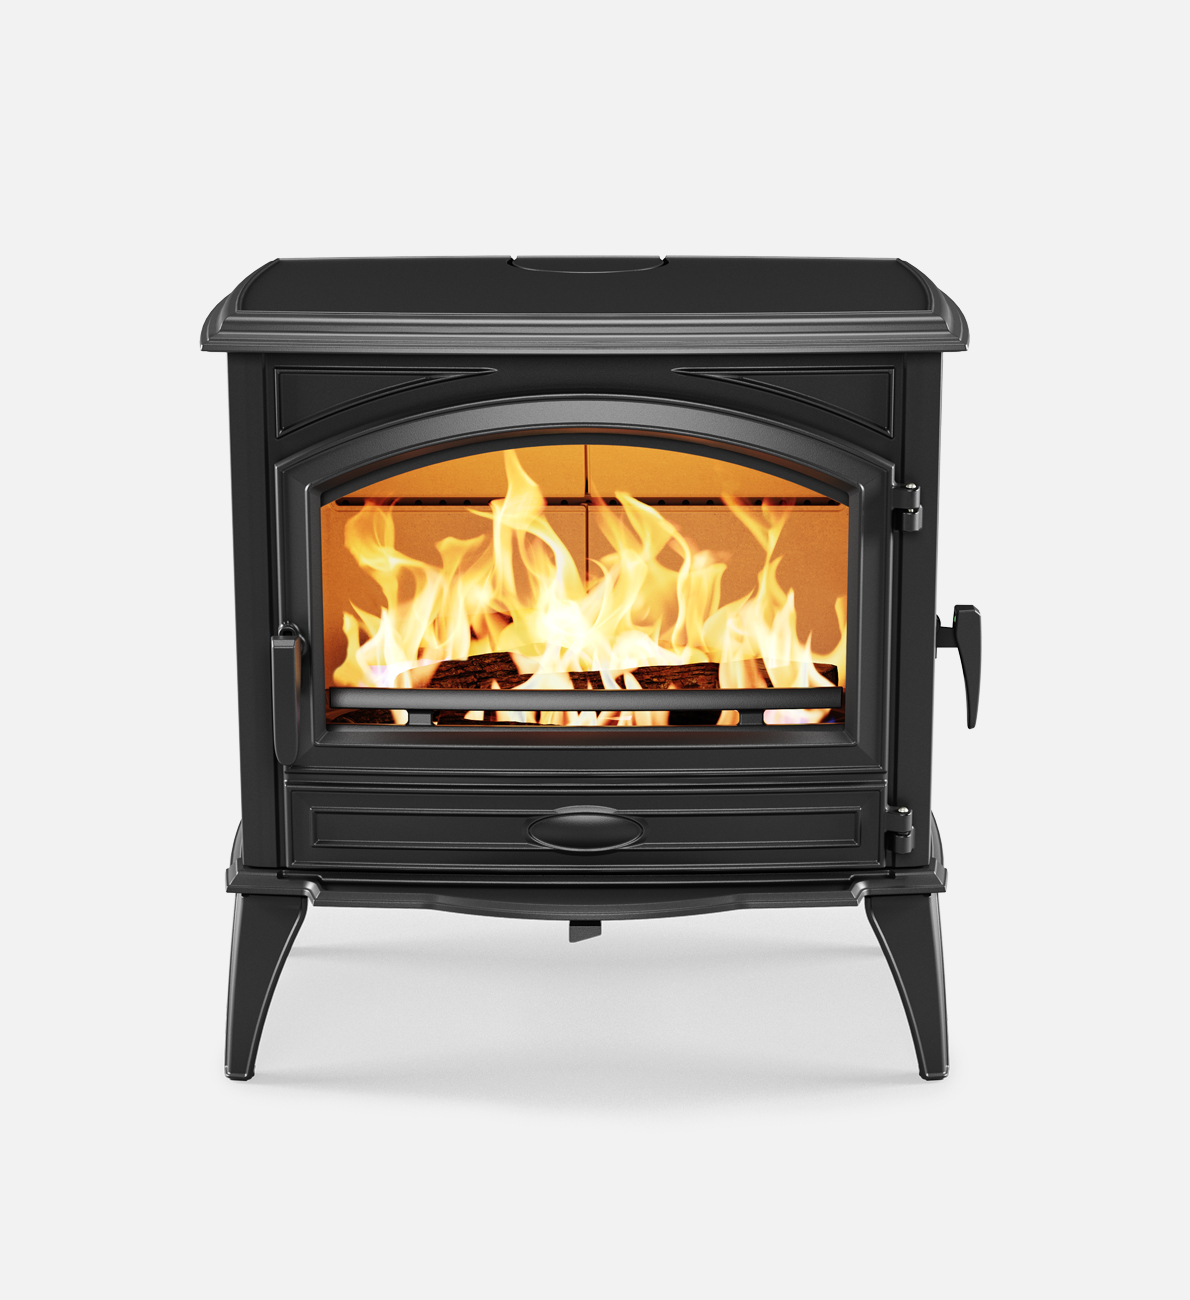 Dovre peisovn 760 wd front